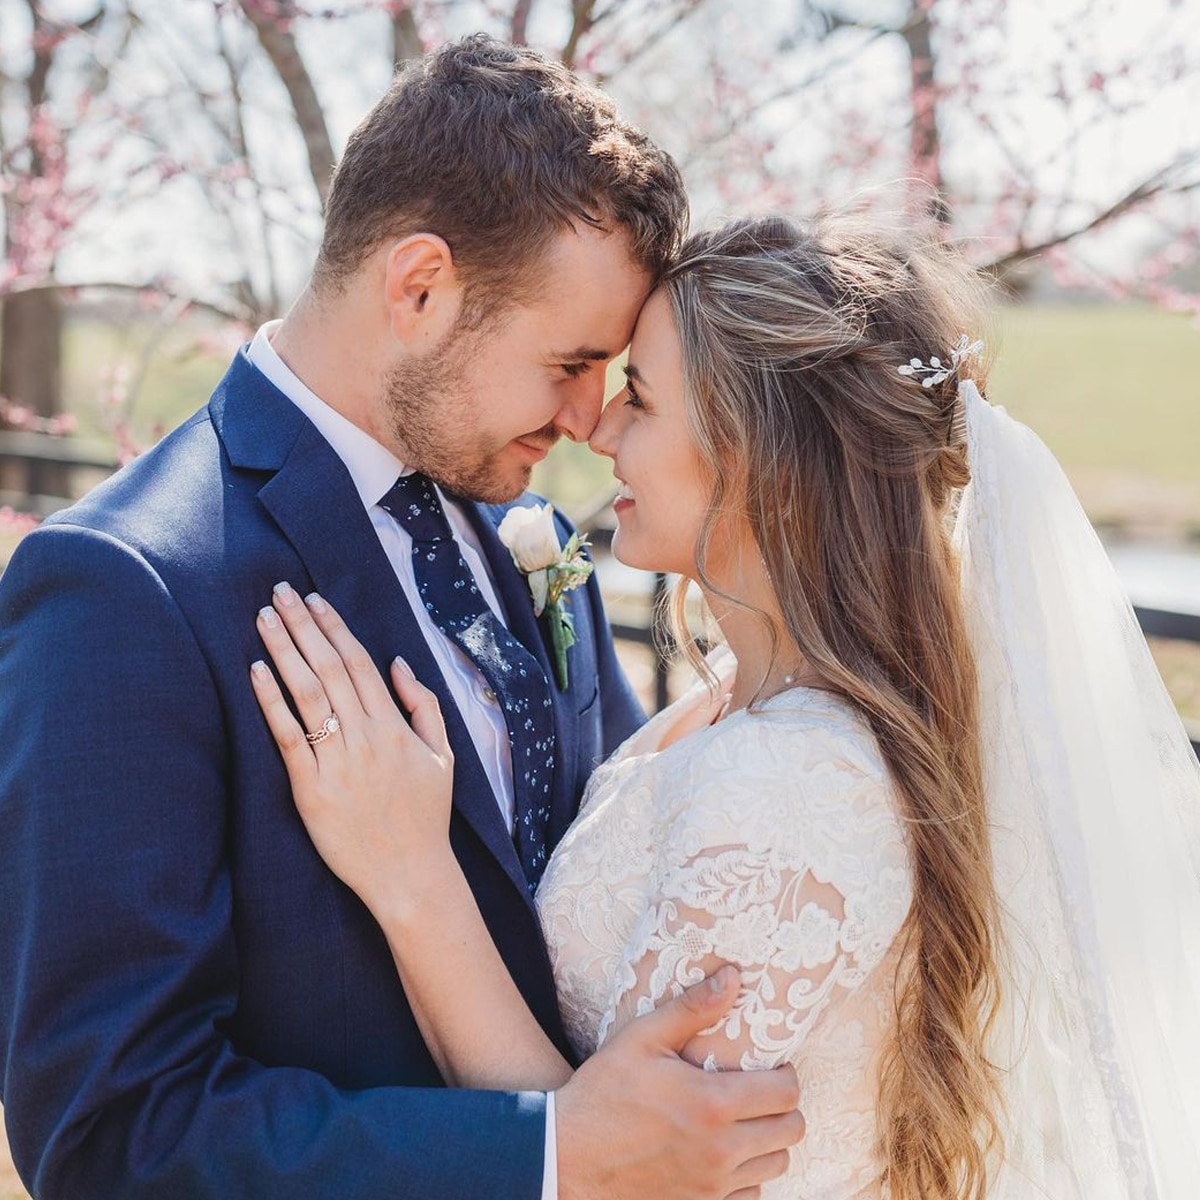 Jed Duggar Marries Katey Nakatsu After One Year of Courting